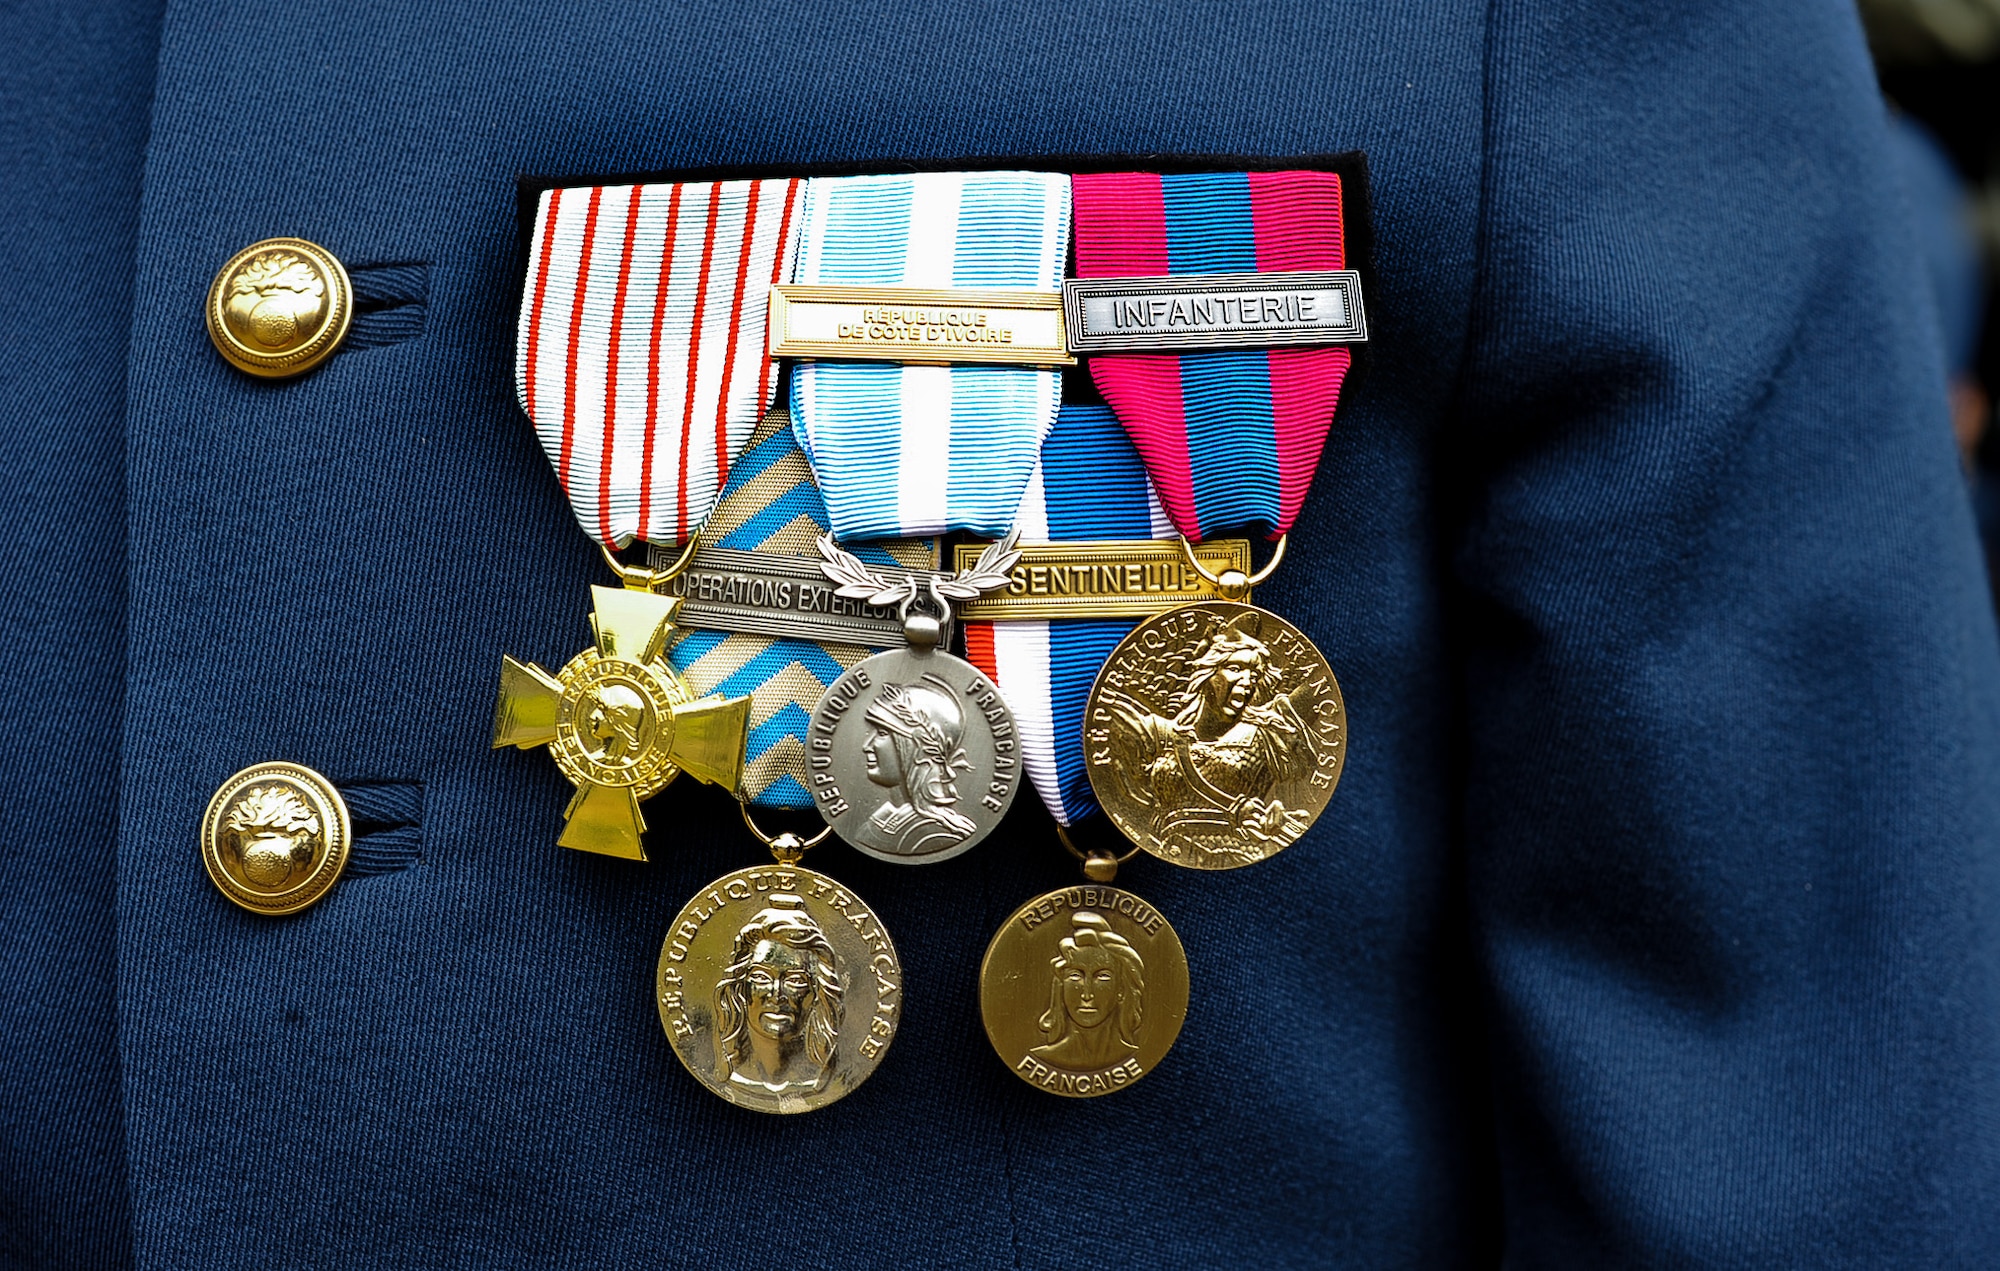 A Bastille Day military parade participant’s medals are displayed on their uniform at Camp de Satory, France, July 12, 2017. U.S. and Armée de Terre military members marched in the Bastille Day military parade at the Avenue des Champs-Élysées, France, on July 14, 2017, to celebrate the French Republic’s National Day. (U.S. Air Force photo by Airman 1st Class Savannah L. Waters)